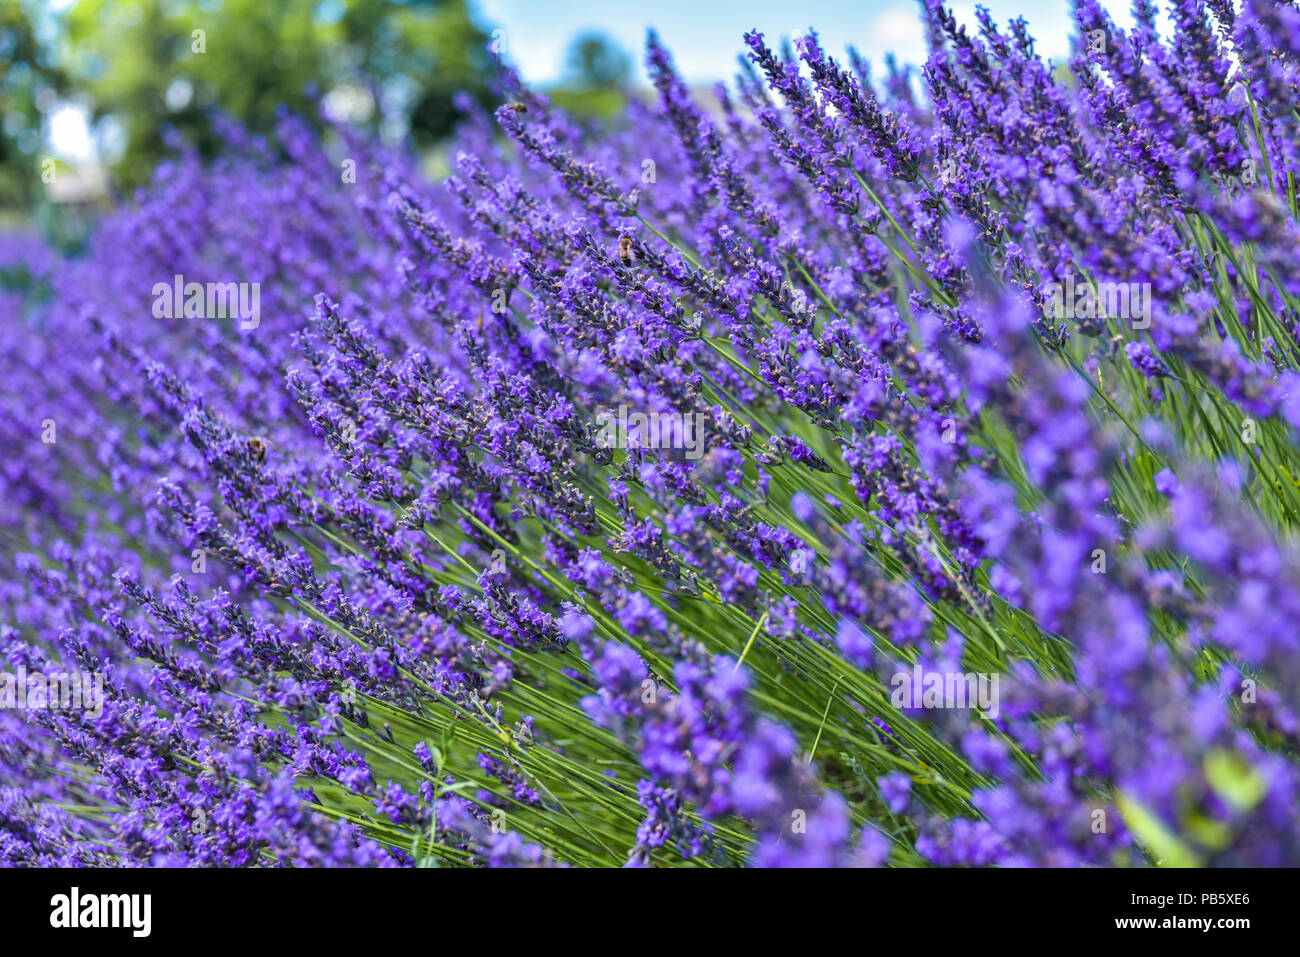 lavender bush on the field, close up, taken at Grignan, Provence, France, flowers in full bloom Stock Photo